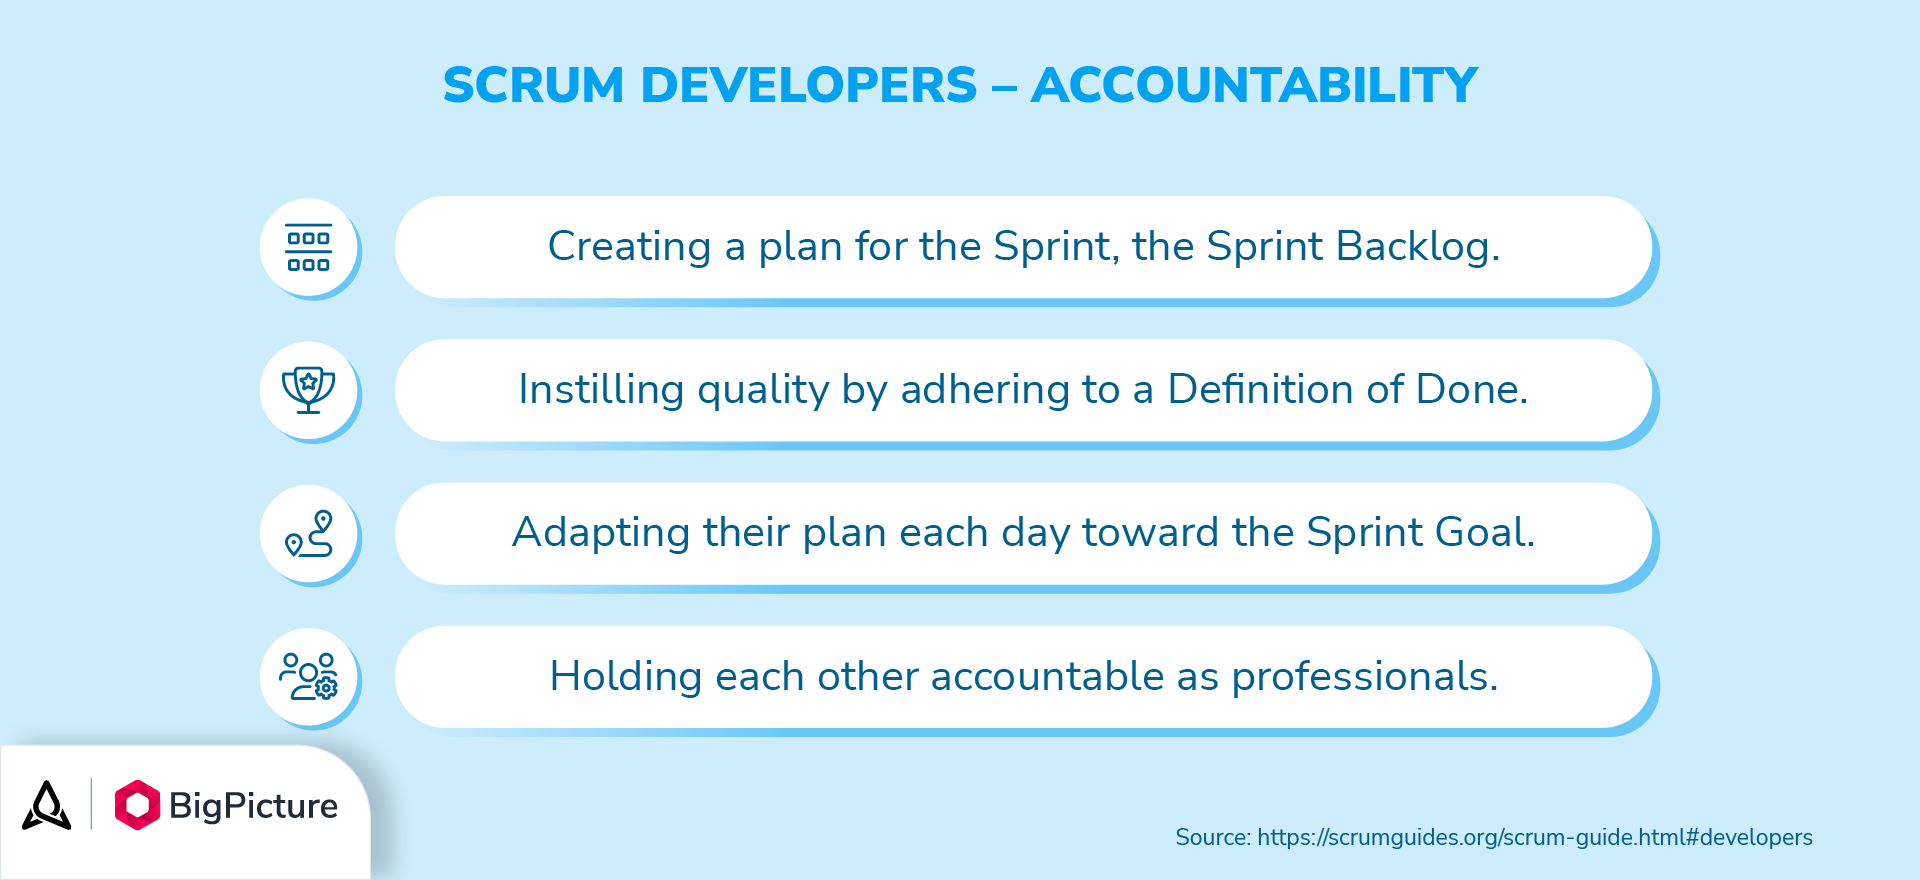 A list of areas Developers are accountable for in Scrum